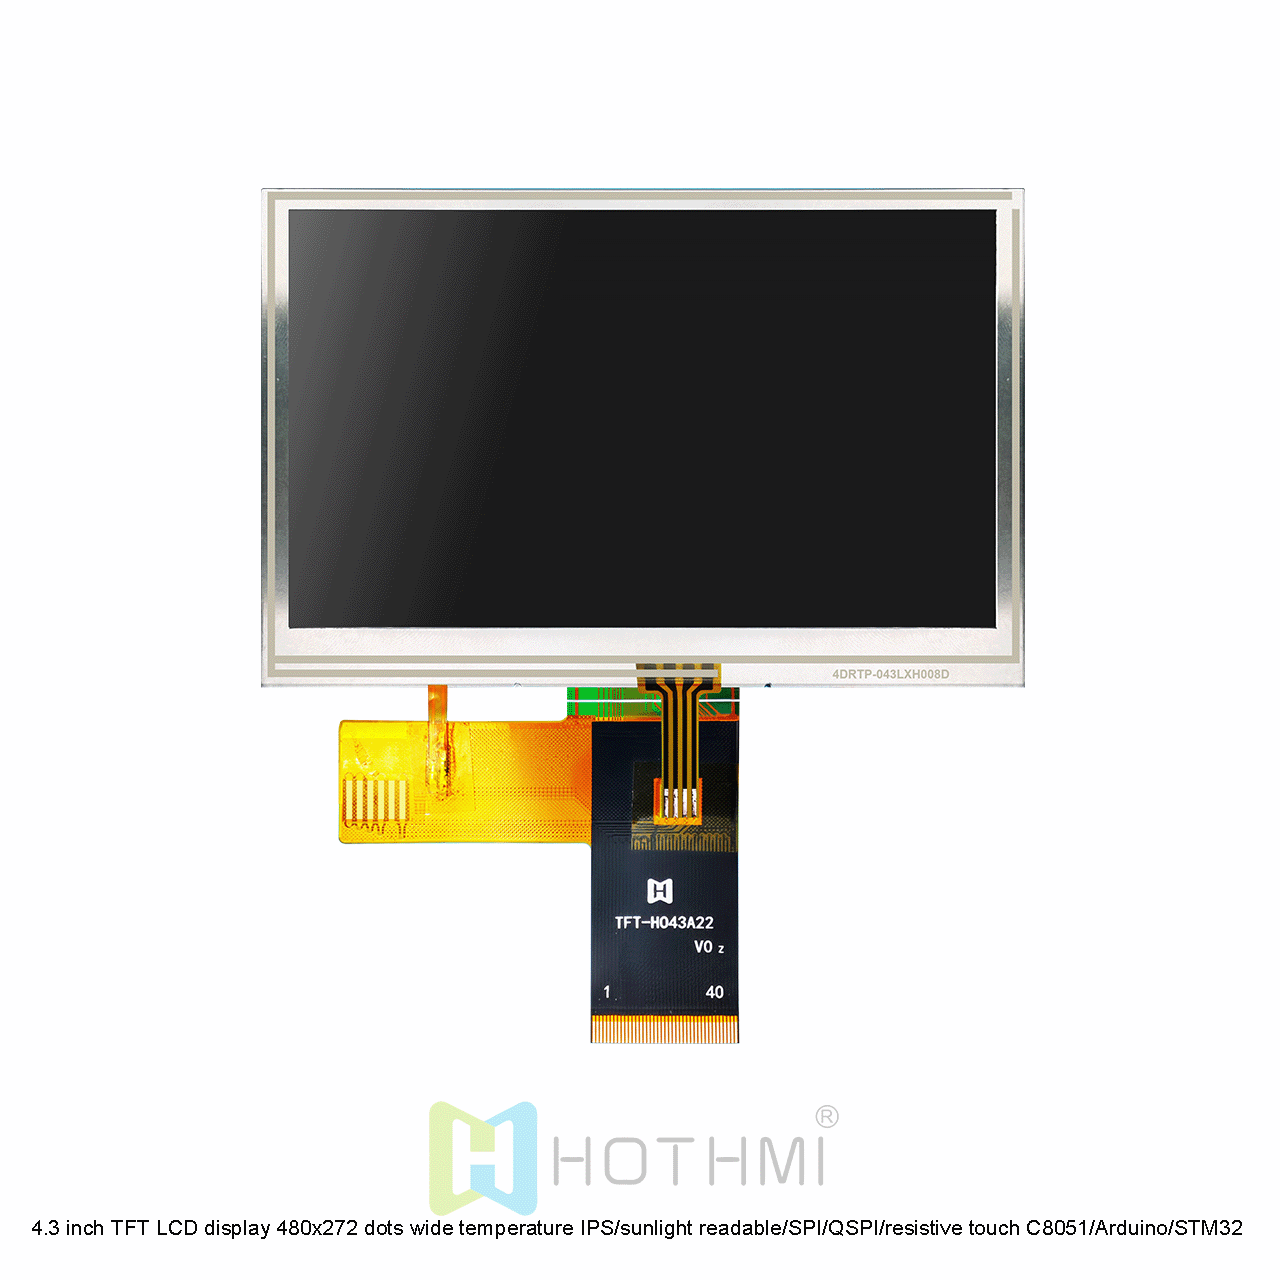 4.3 inch TFT LCD display 480x272 dots wide temperature IPS full viewing angle/sunlight readable/SPI/QSPI interface/resistive touch C8051/Arduino/STM32